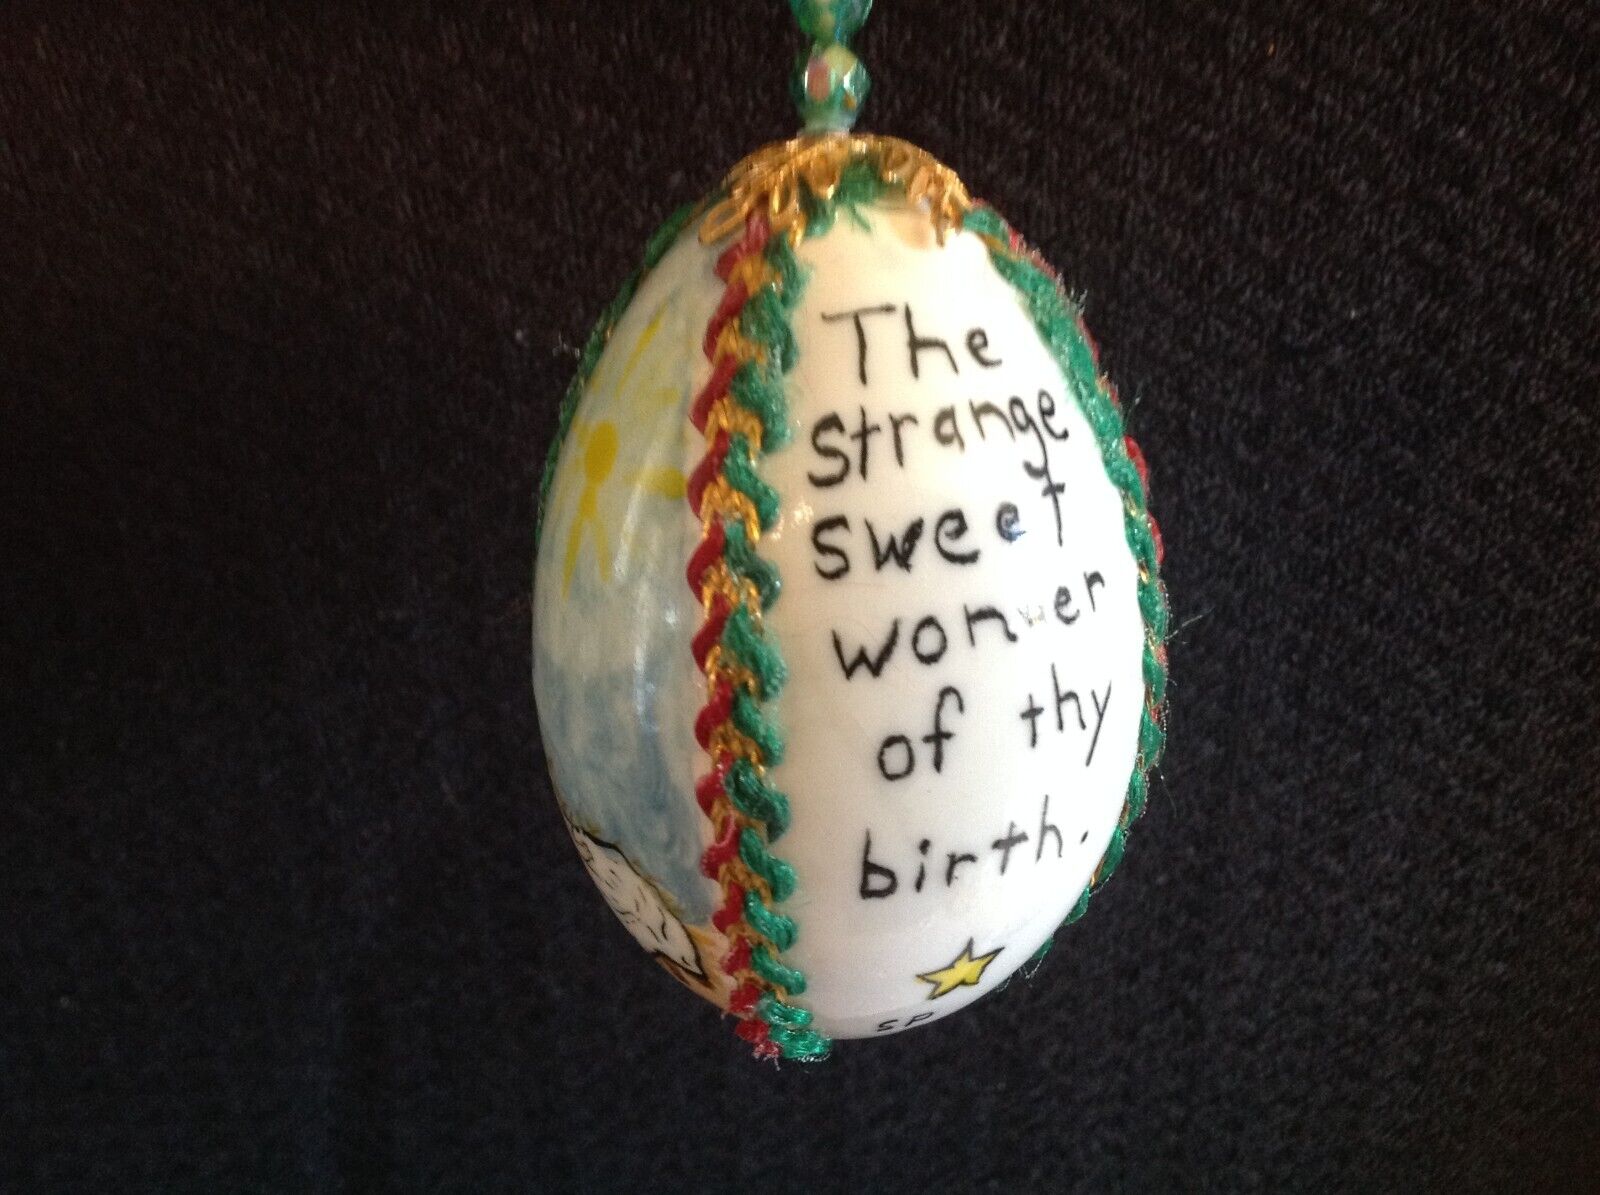 Vintage 1984 Christmas Hand Painted Egg Ornament Wonder of thy Birth by S. P.